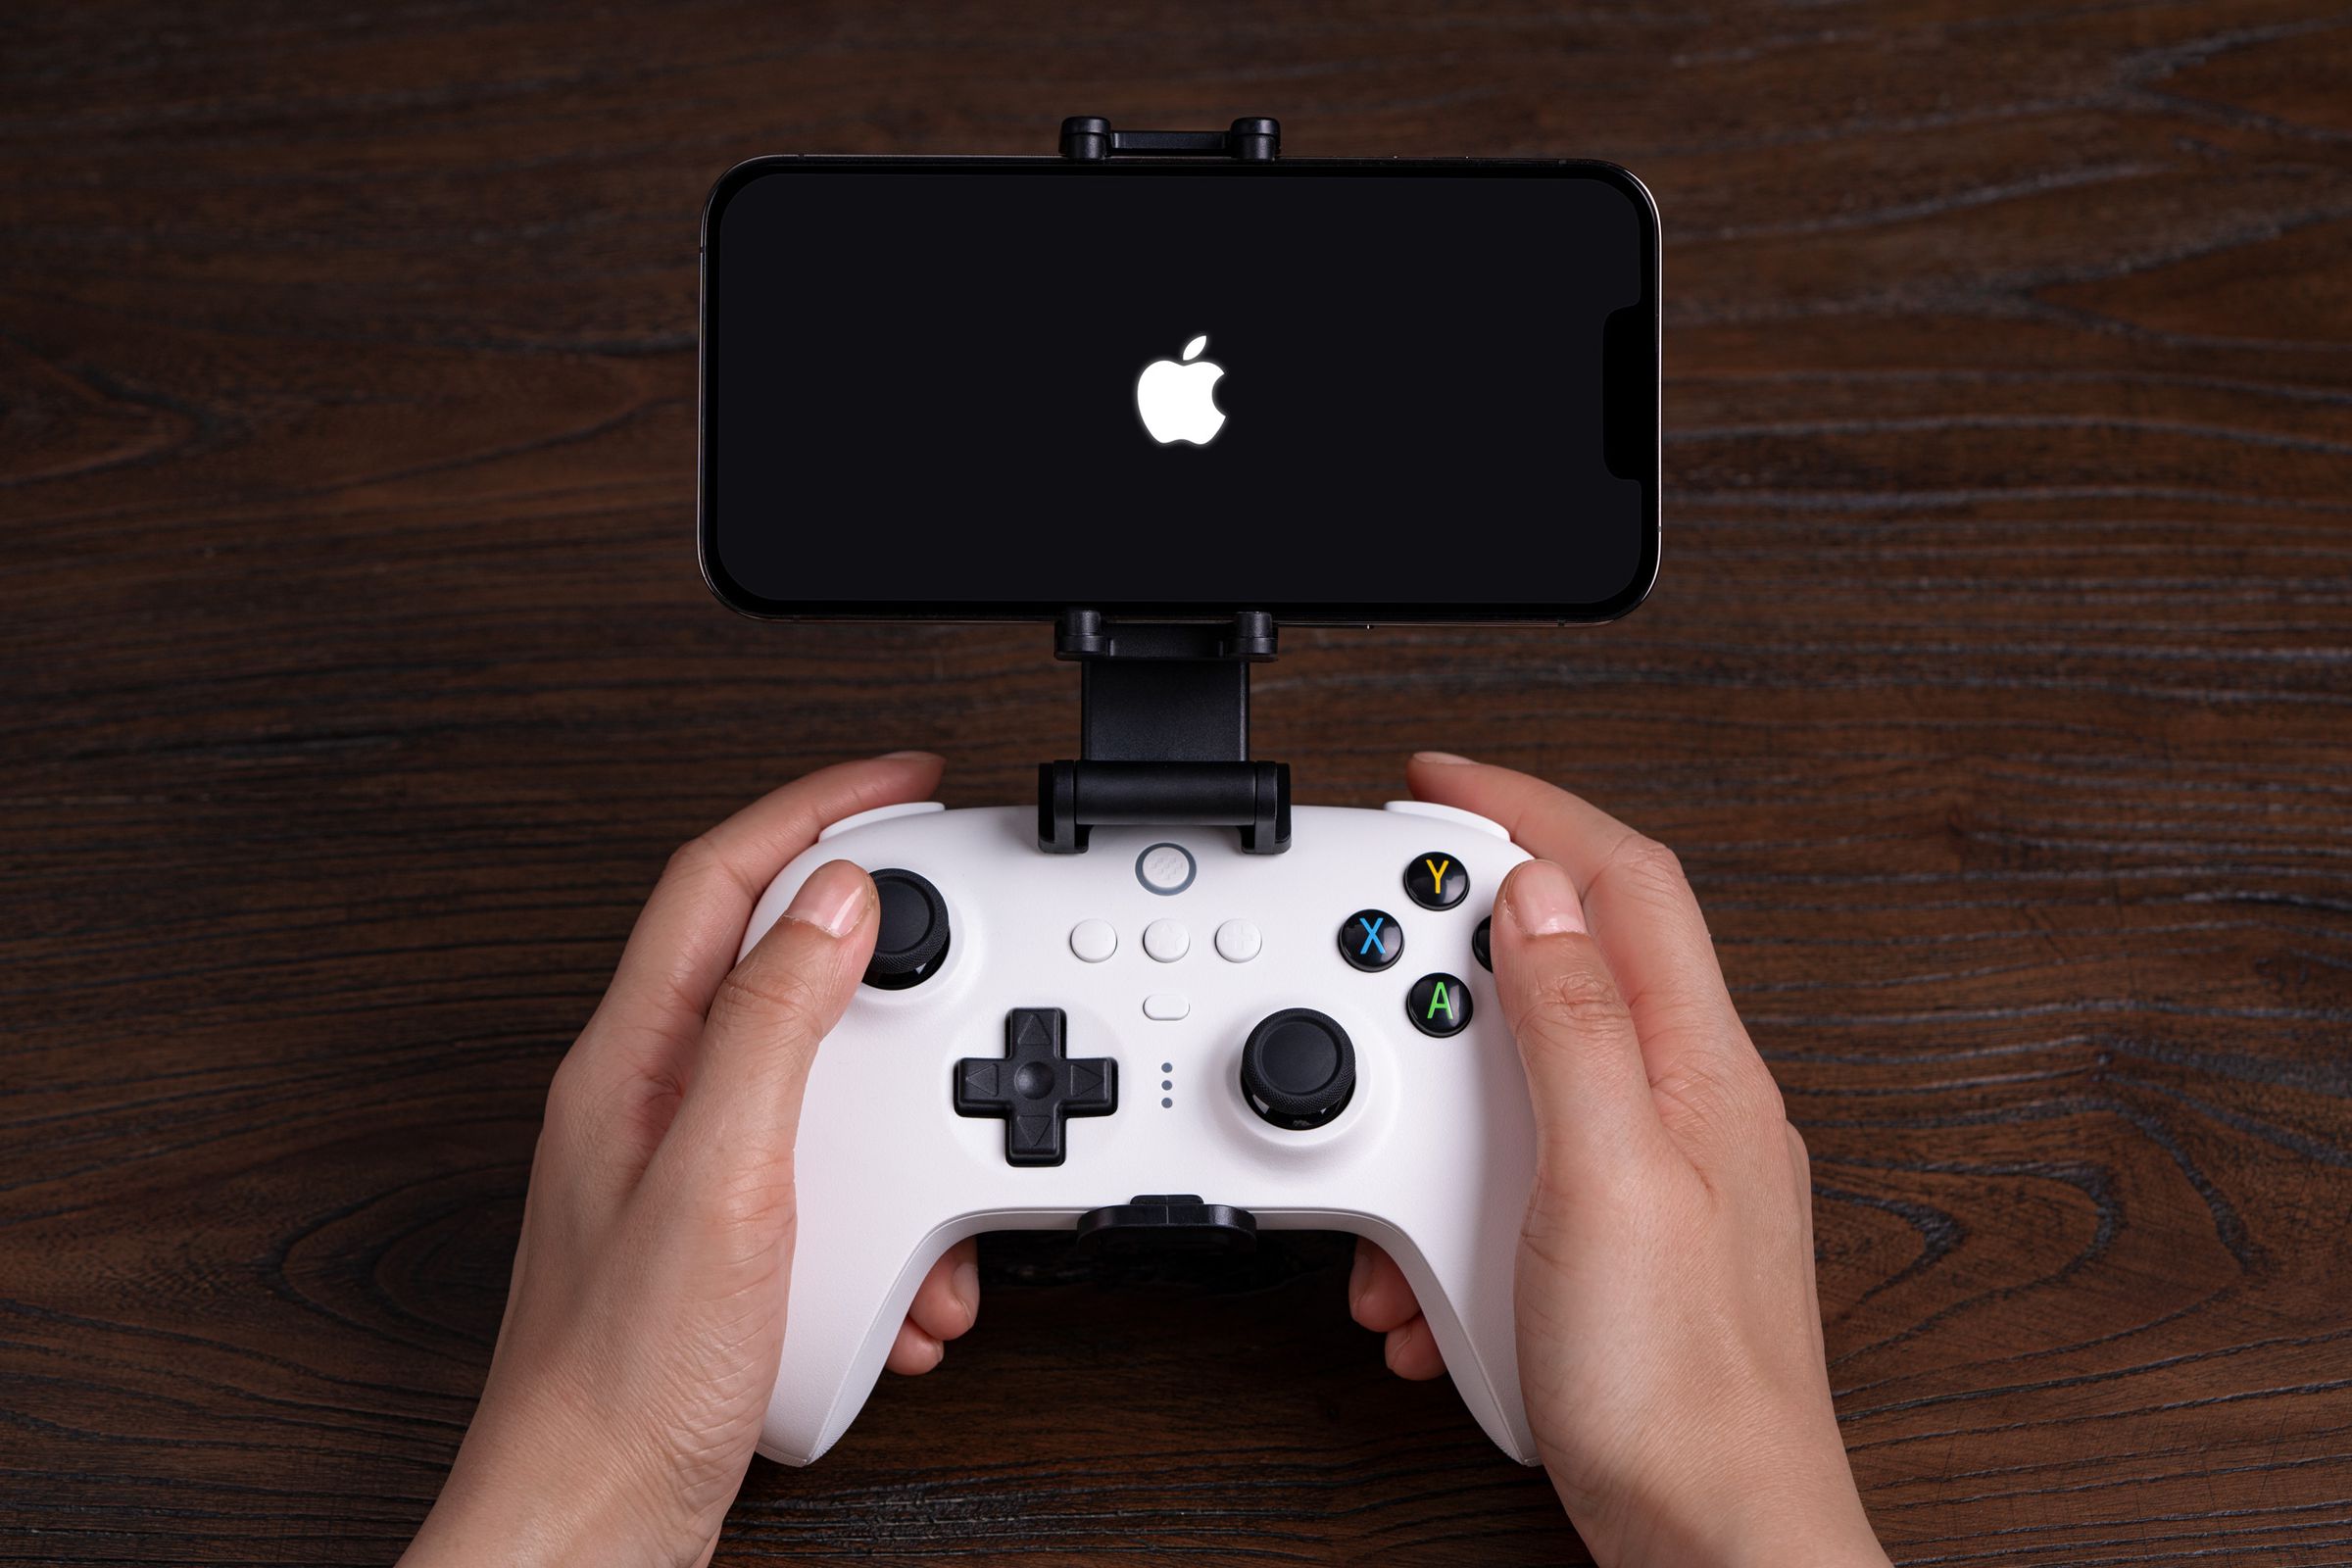 An 8BitDo wireless game controller with an Apple iPhone attached to it via a mounting clip, held by a pair of hands.